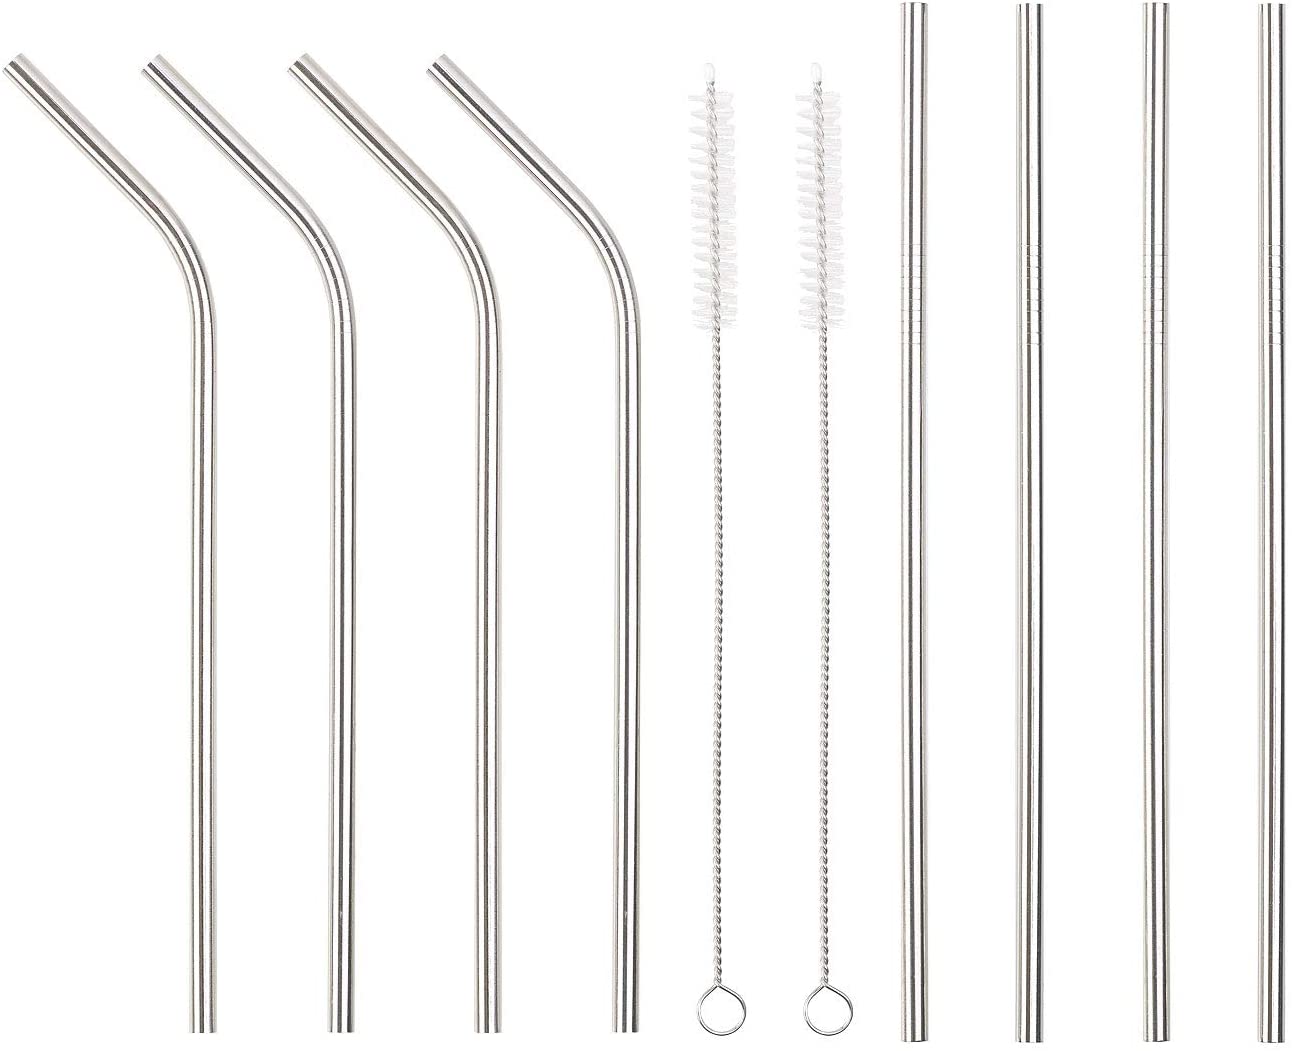 Rosenstein & Söhne Stainless steel straw: set of 8 stainless steel straws and 2 cleaning brushes (metal straws).